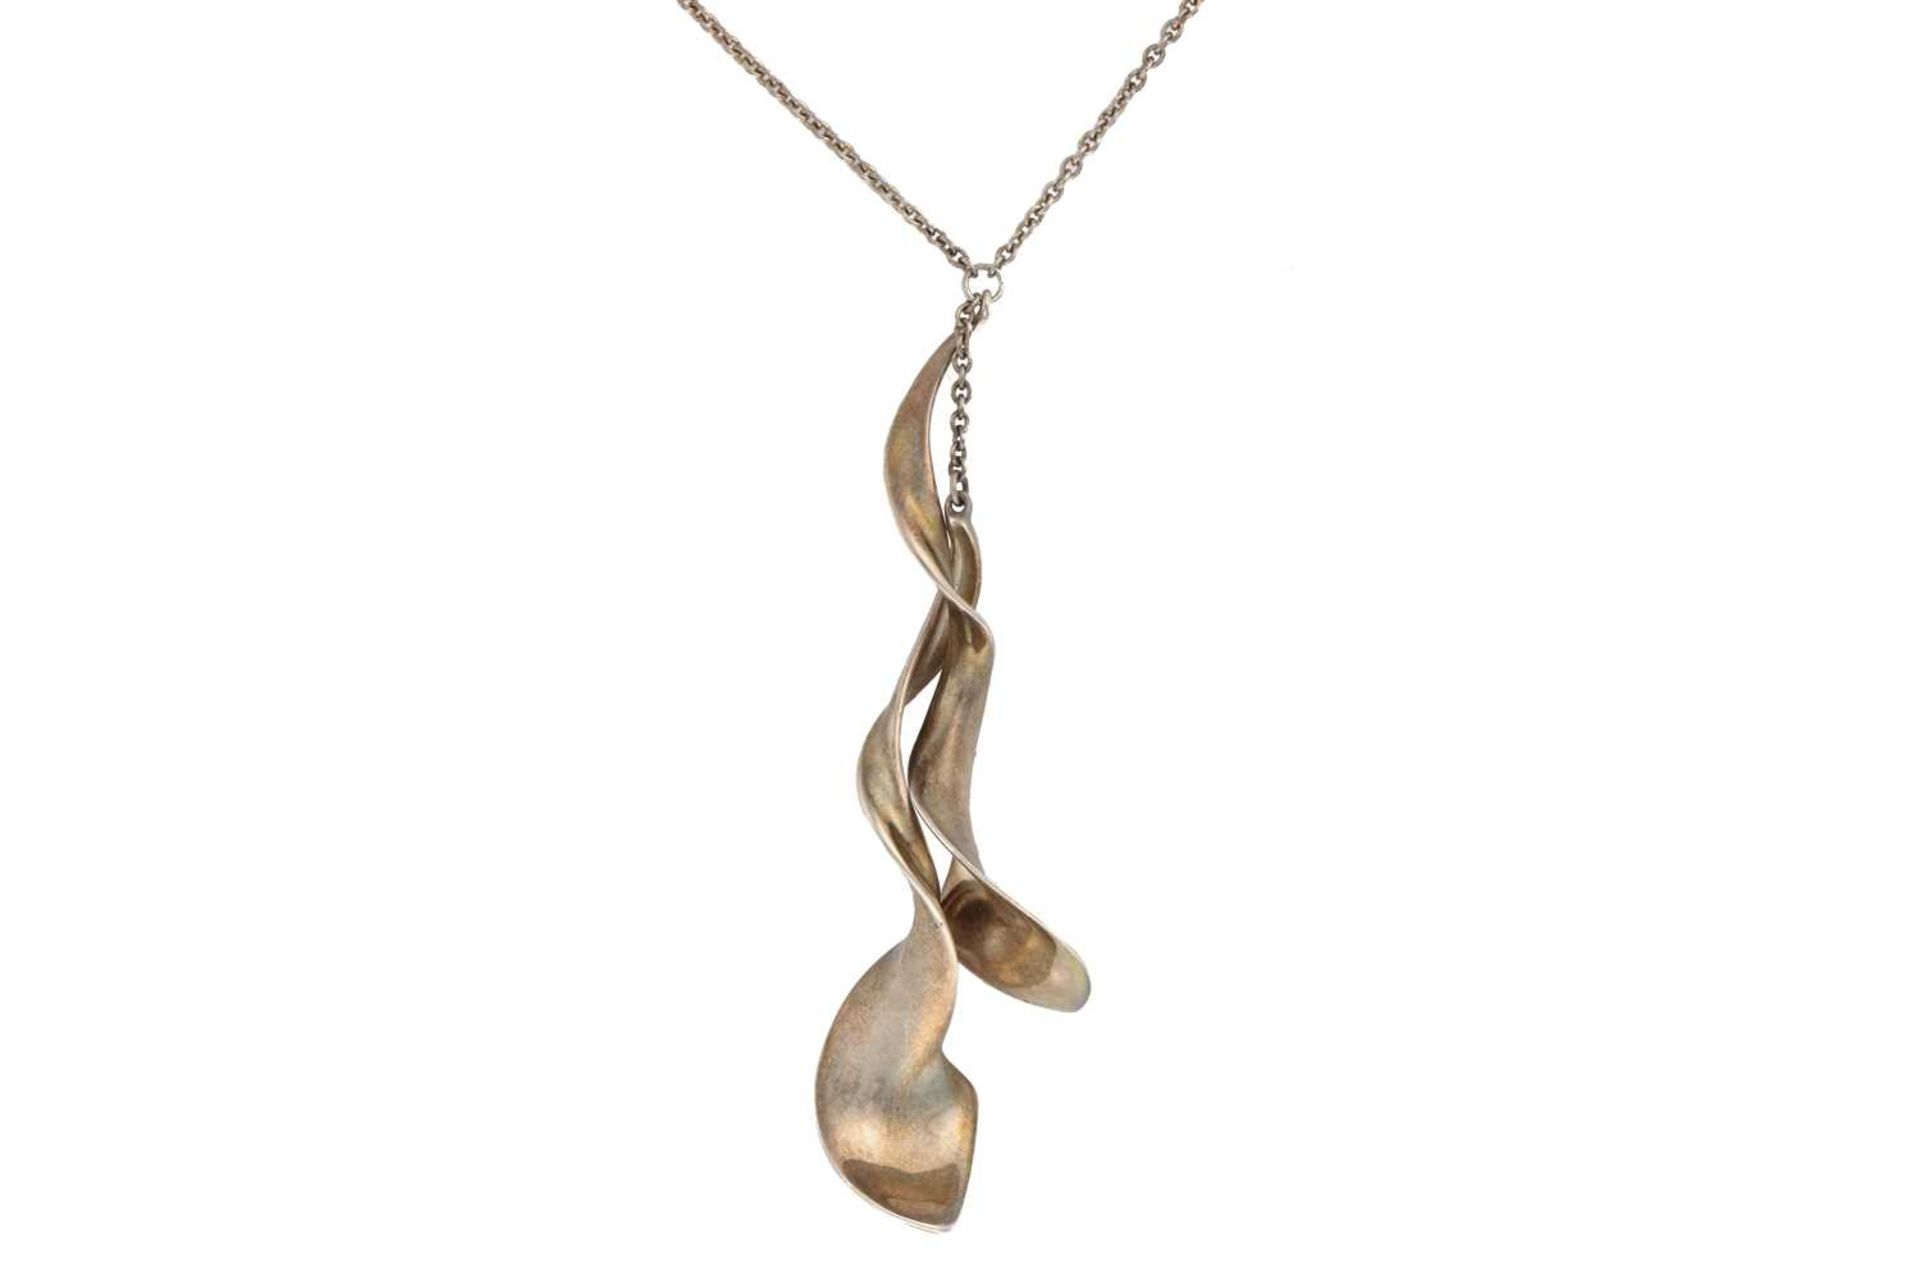 Tiffany & Co. - 'Orchid' double drop pendant necklace, of twisted organic form, designed by Frank